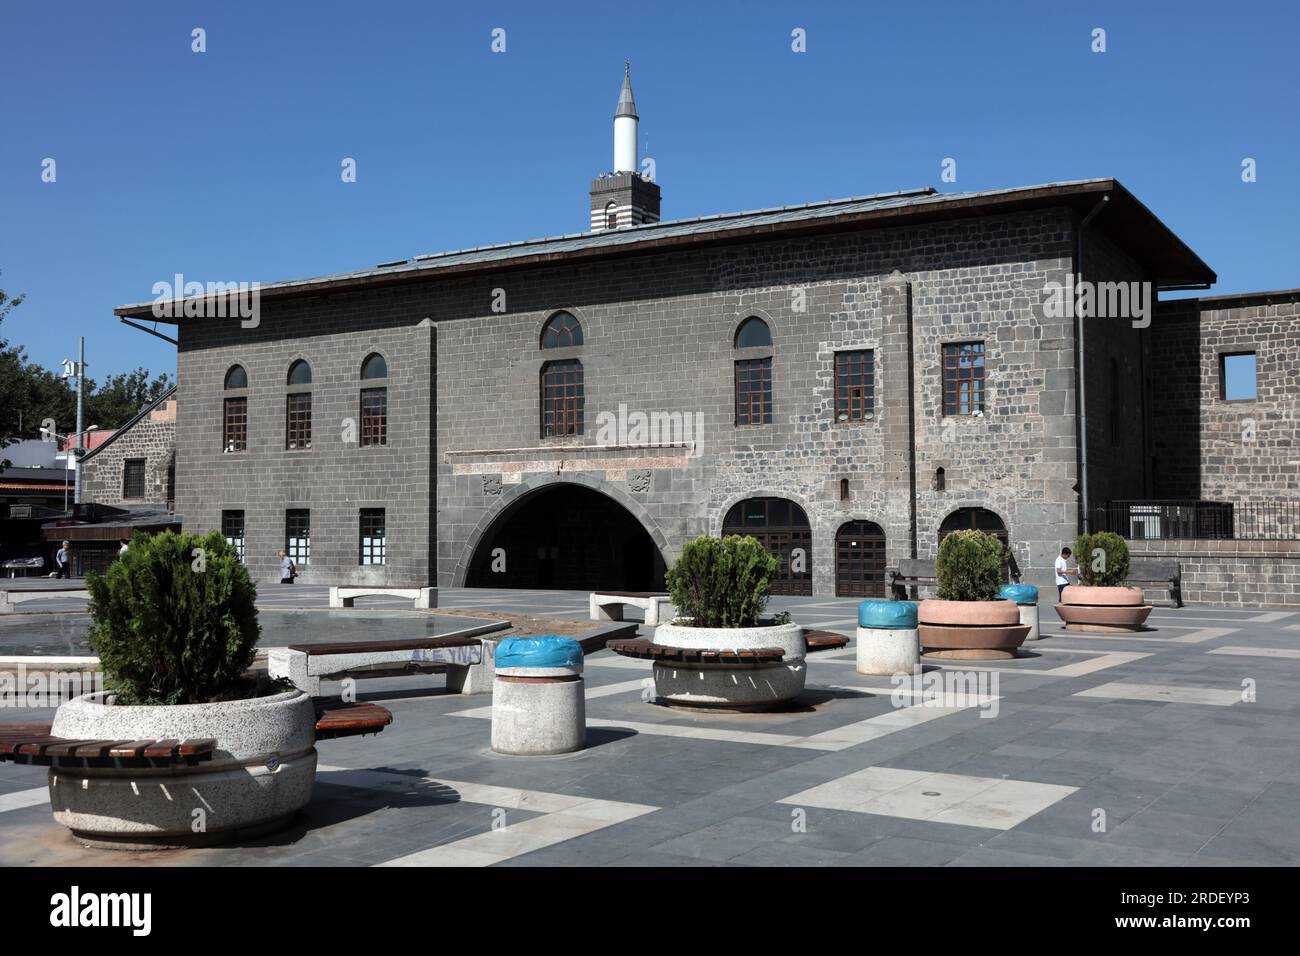 Diyarbakir Great Mosque was converted from Martoma Church into a mosque in 639. Diyarbakır, Turkey. Stock Photo